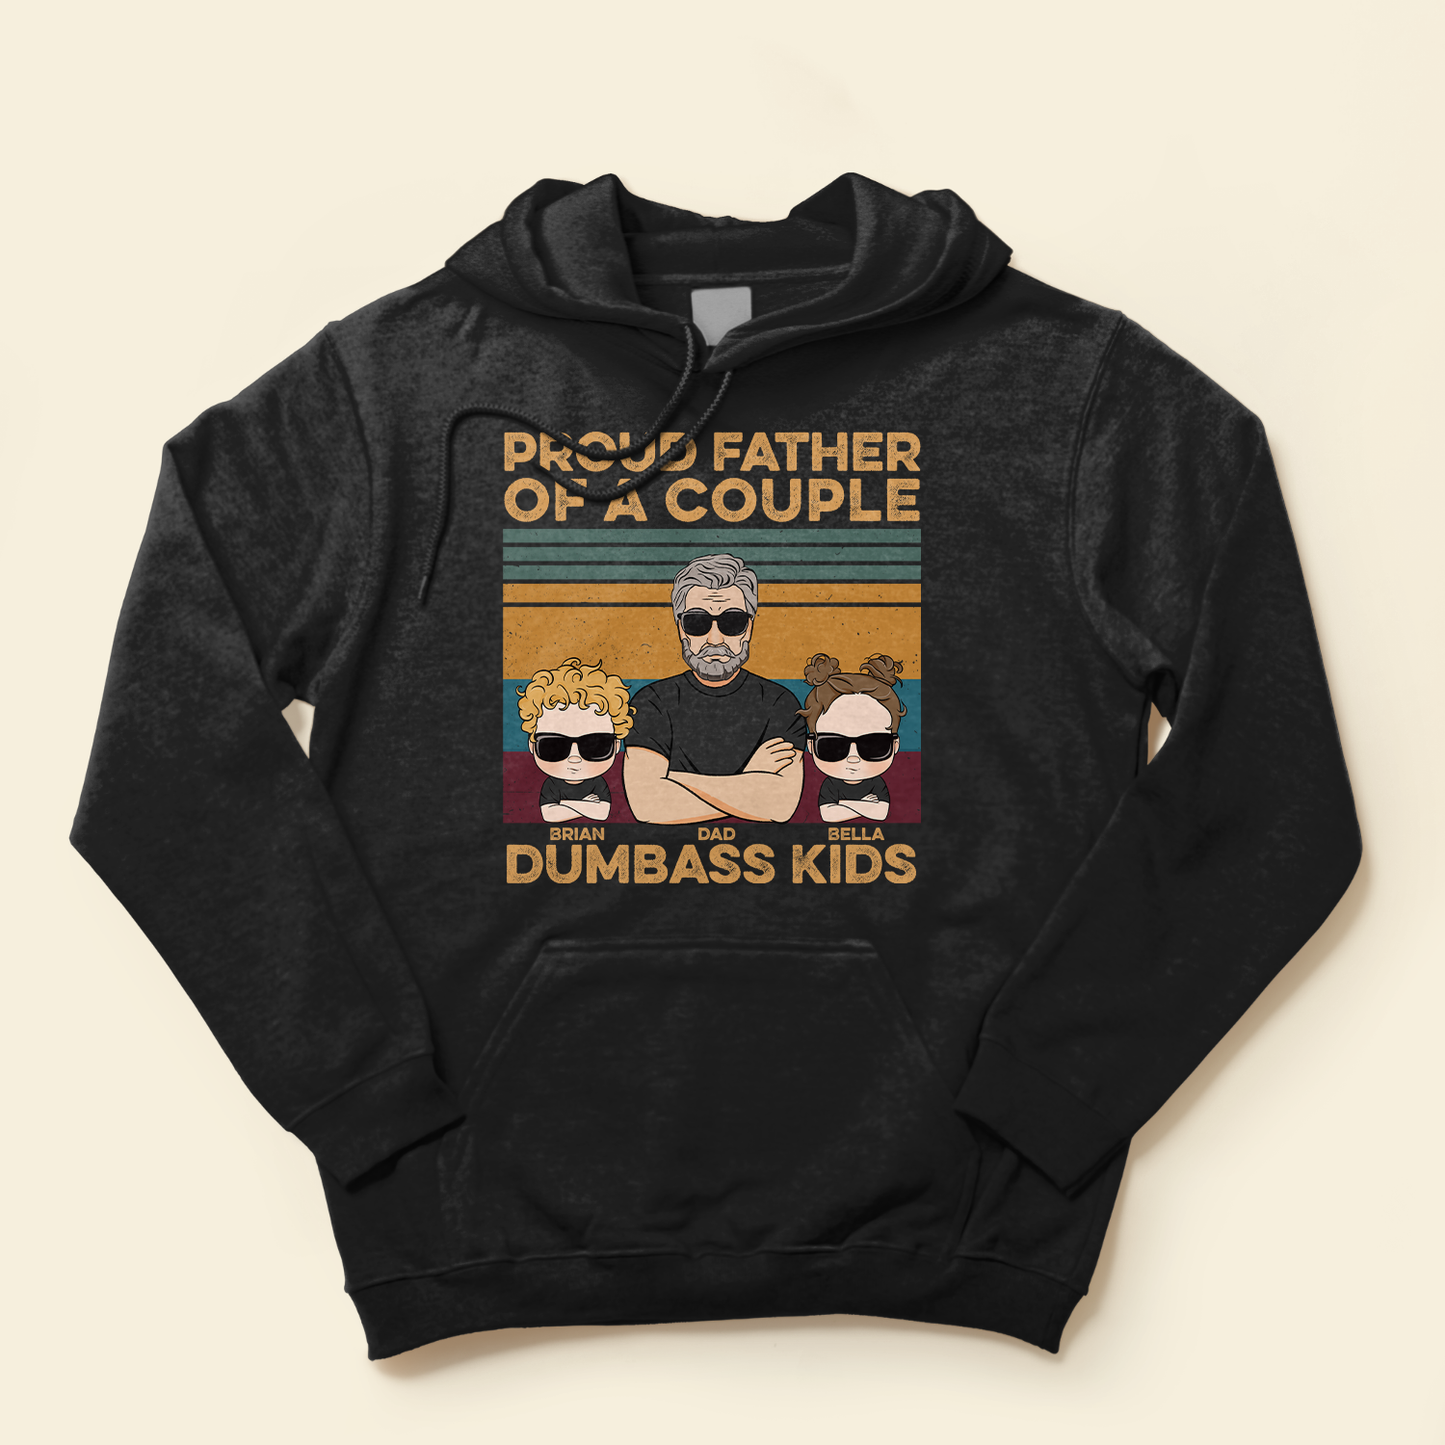 Proud Father Of A Few Dumbass Kids - Personalized Shirt